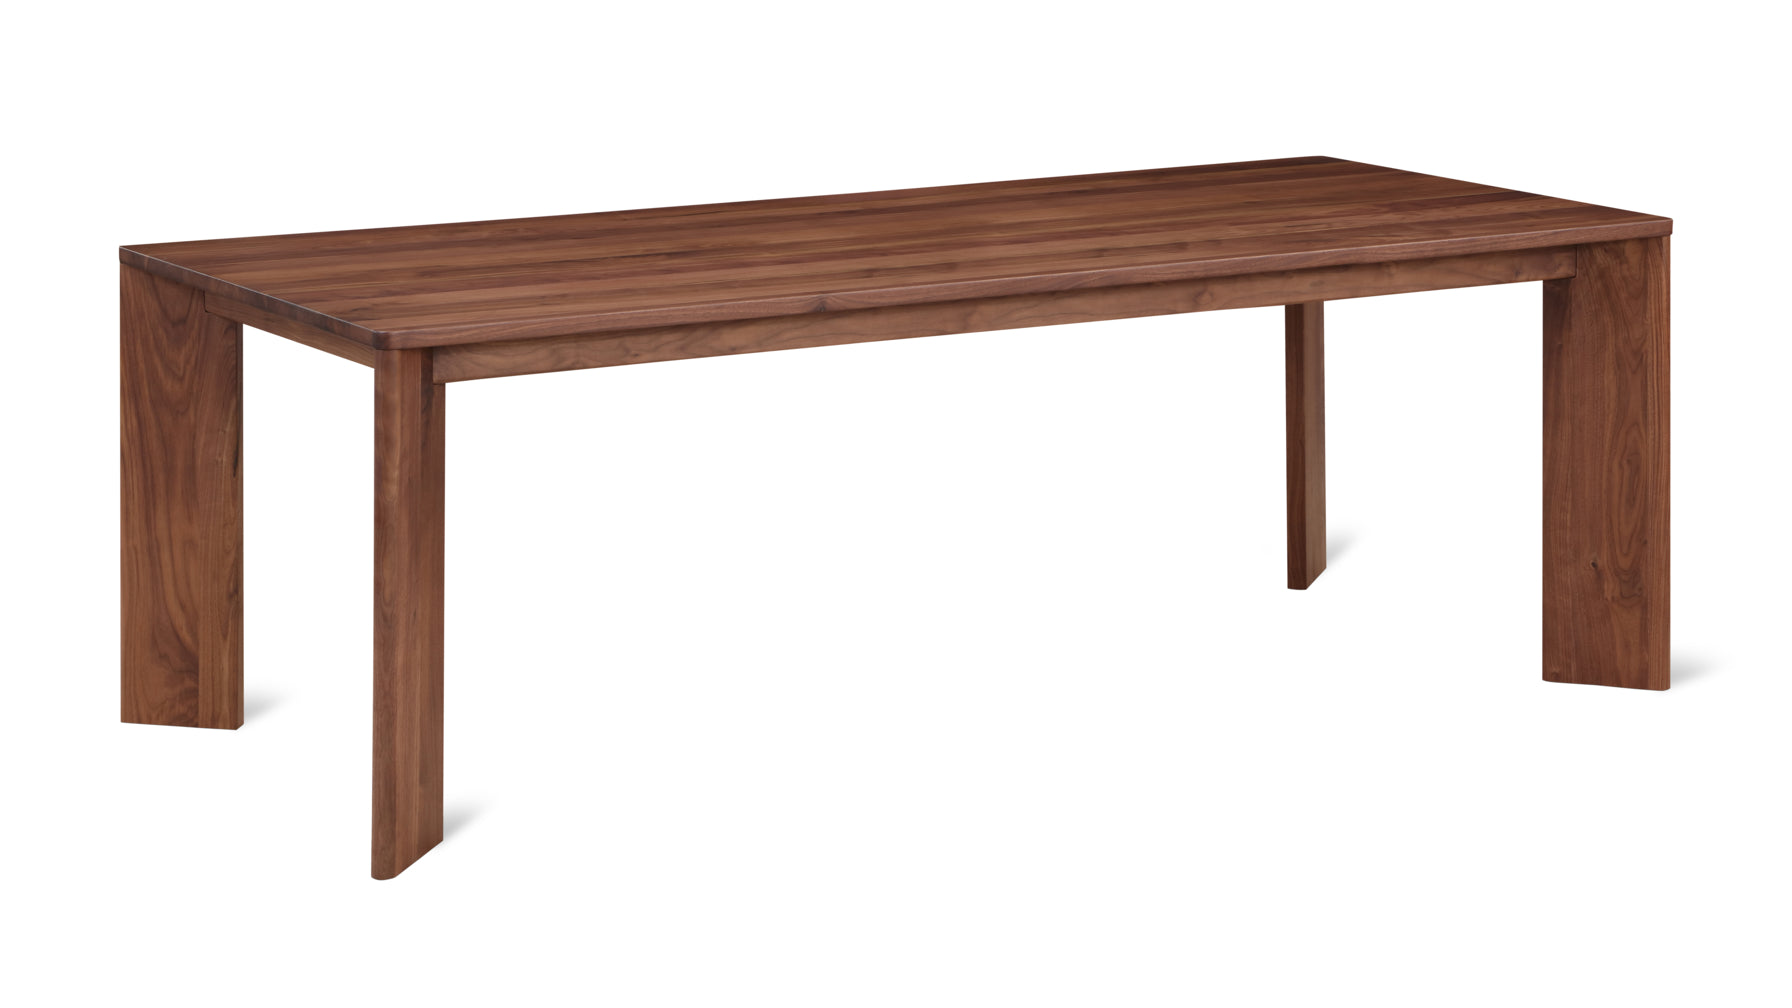 Frame Dining Table, Seats 6-8 People, Walnut - Image 1